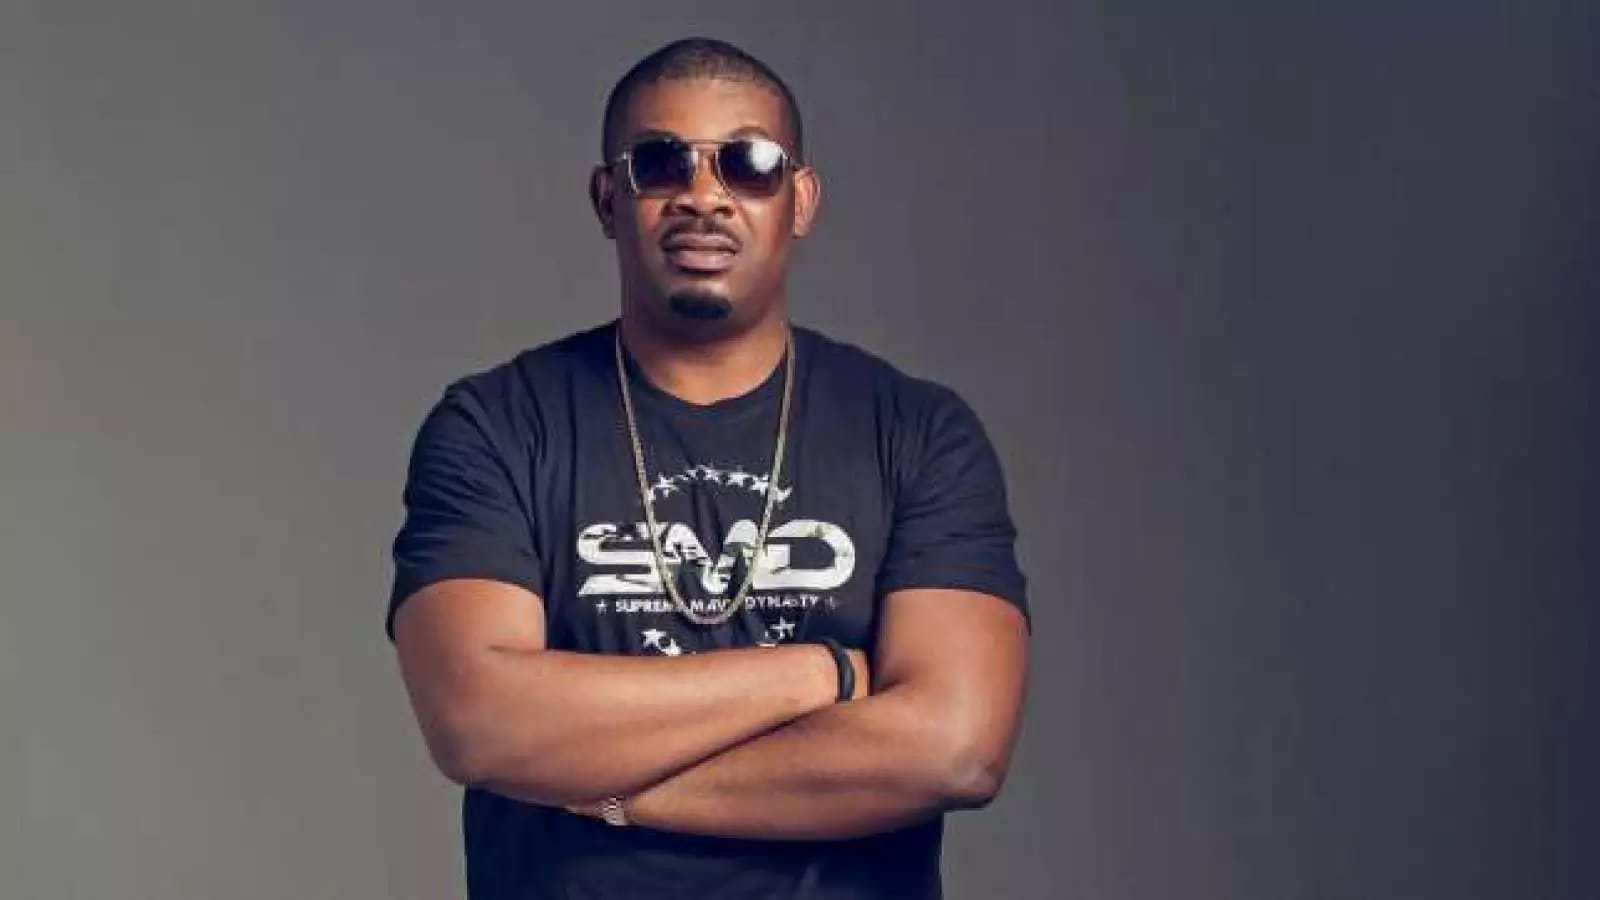 It’s my calling to help young artists – Don Jazzy